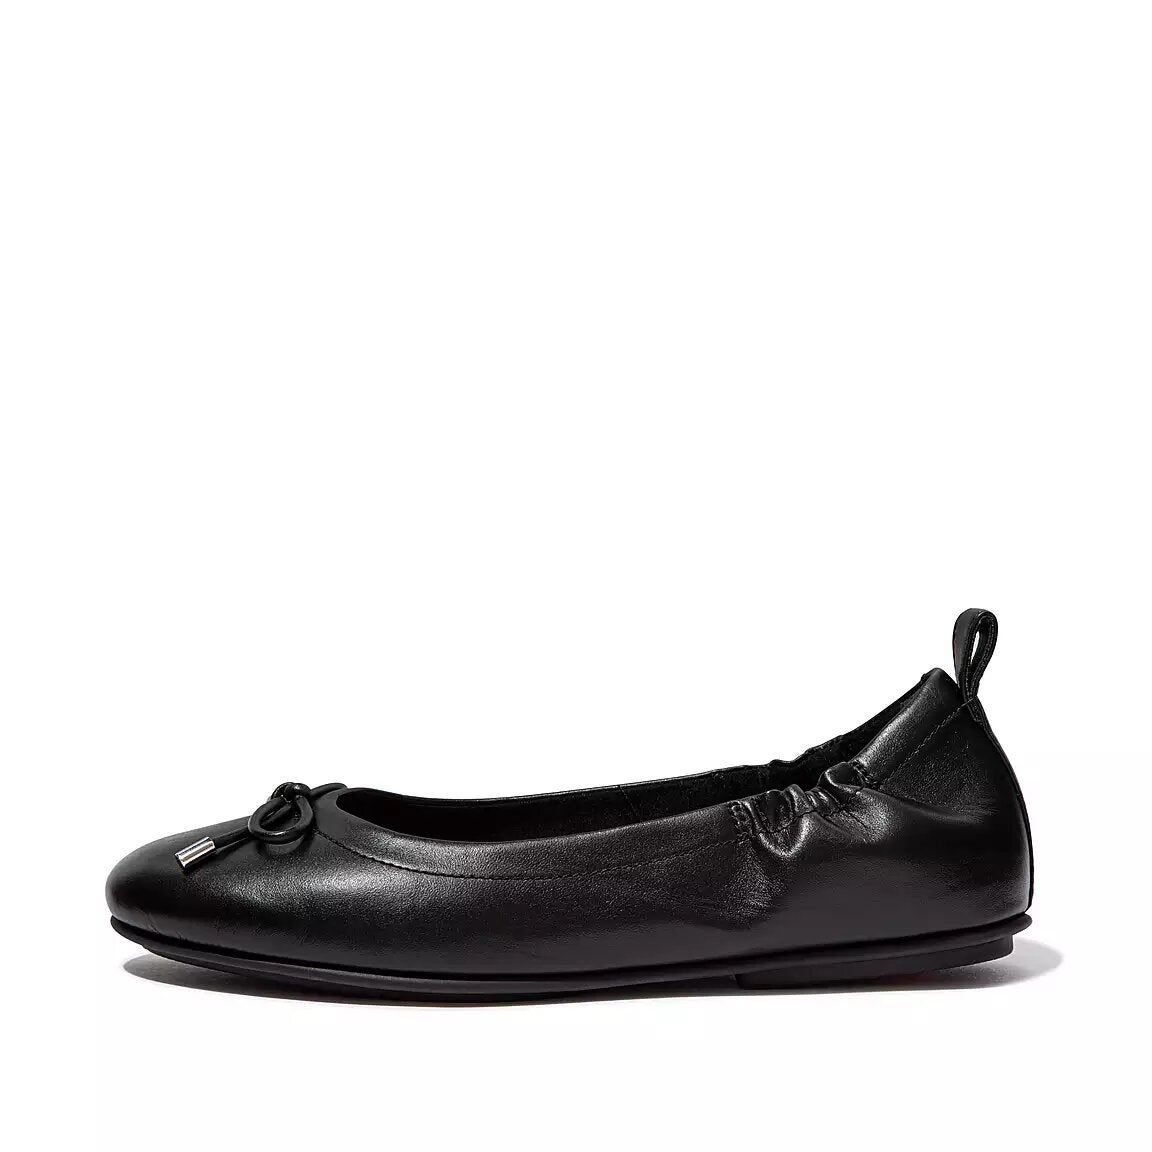 FitFlop + Allegro Bow Leather Ballet Pumps